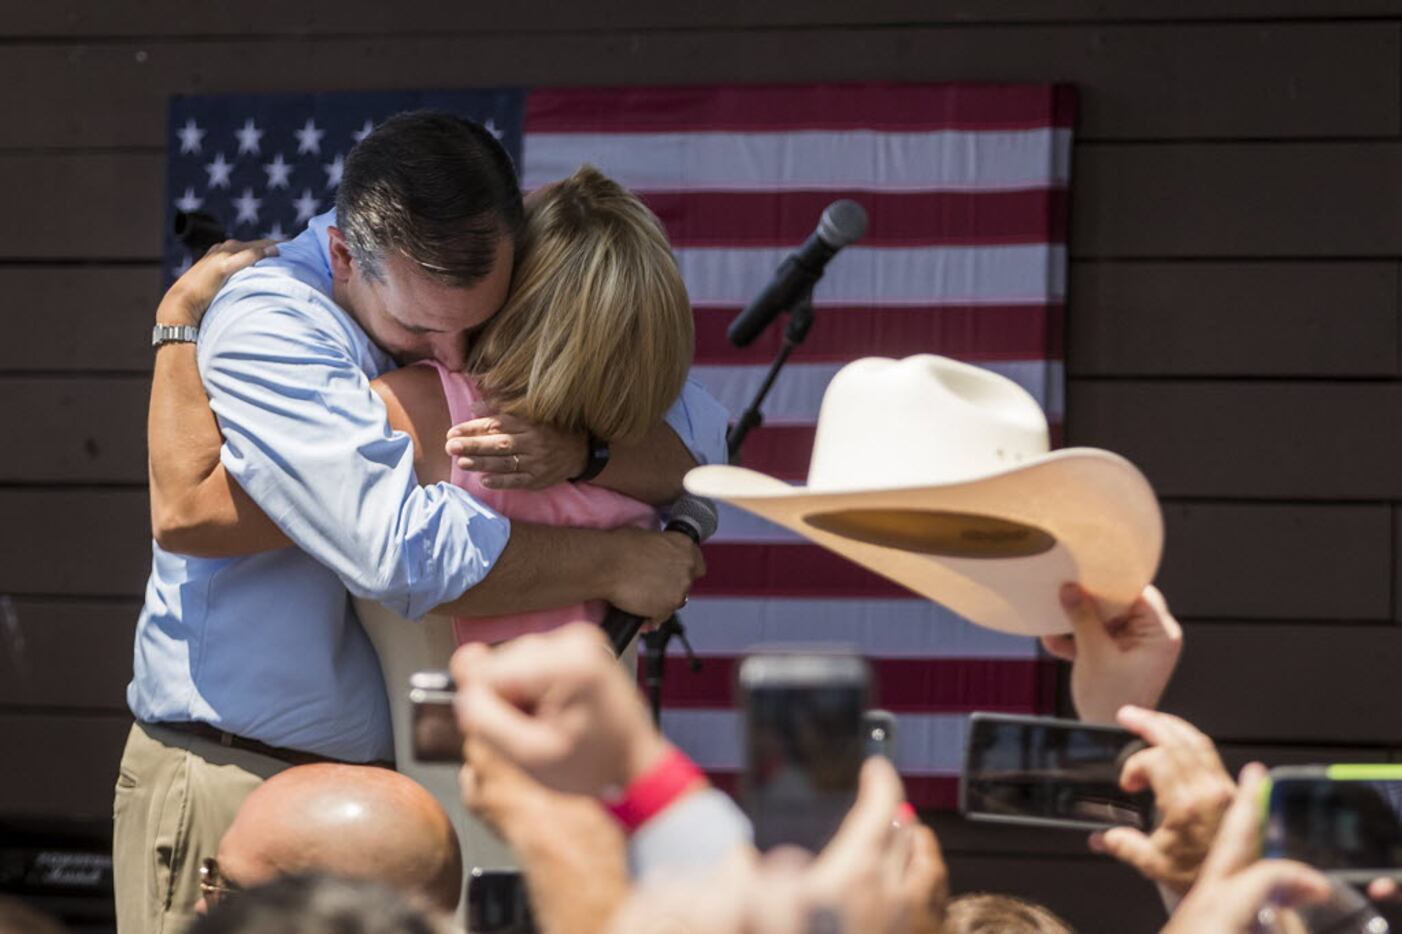 Ted Cruz was joined on stage by his wife, Heidi, at Wednesday's event. (Smiley N. Pool/Staff...